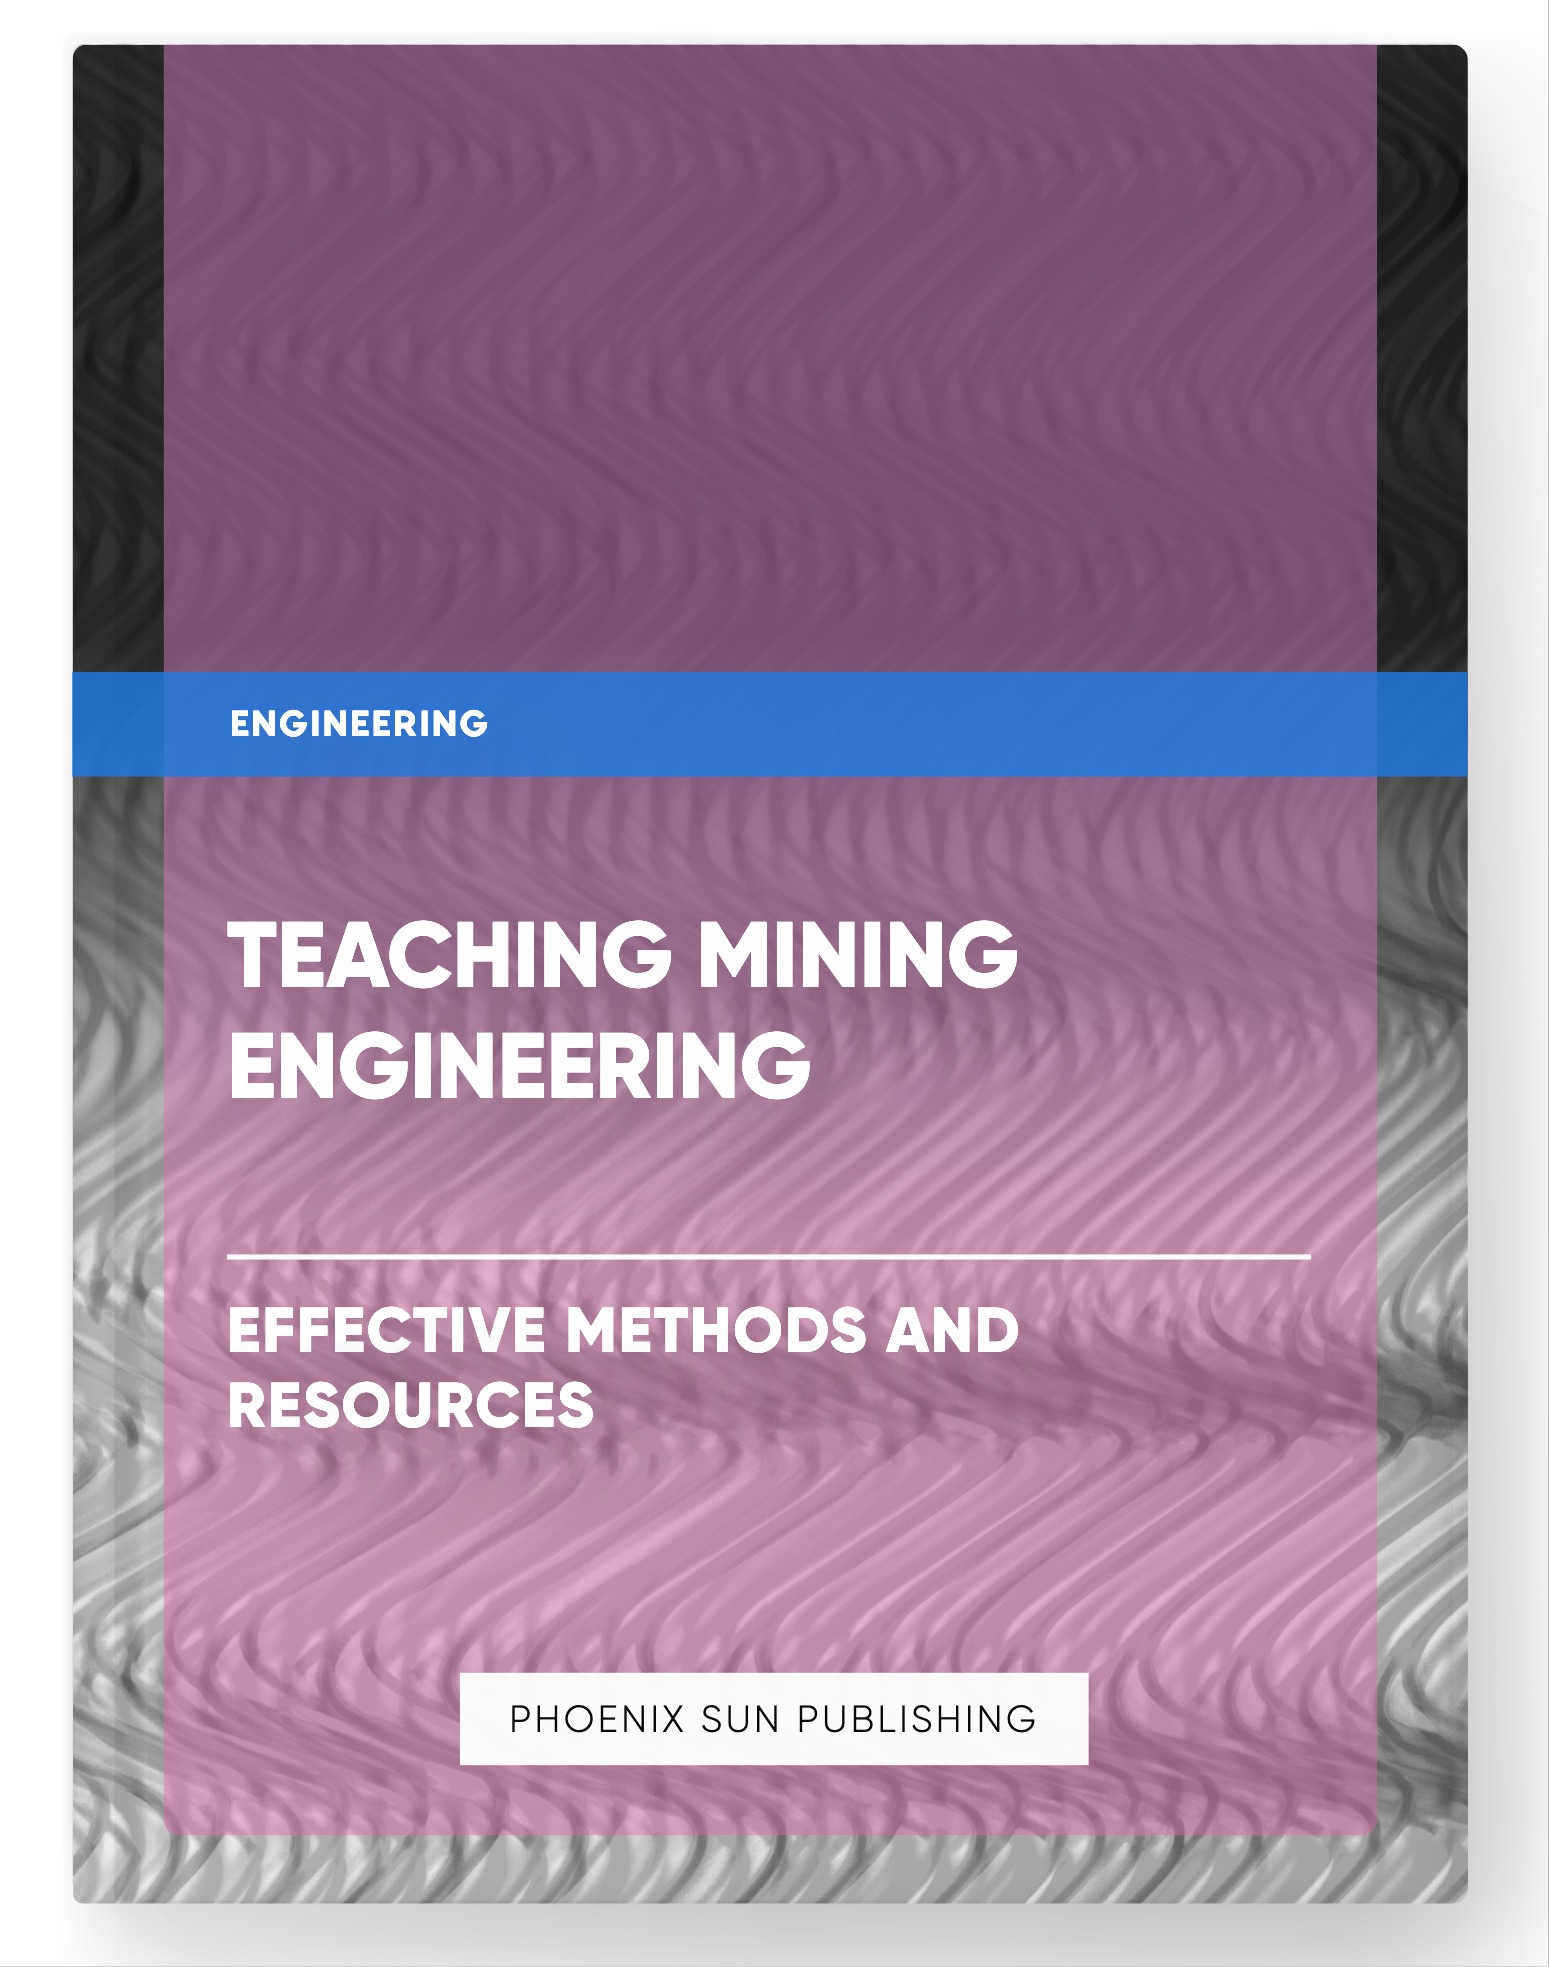 Teaching Mining Engineering – Effective Methods and Resources